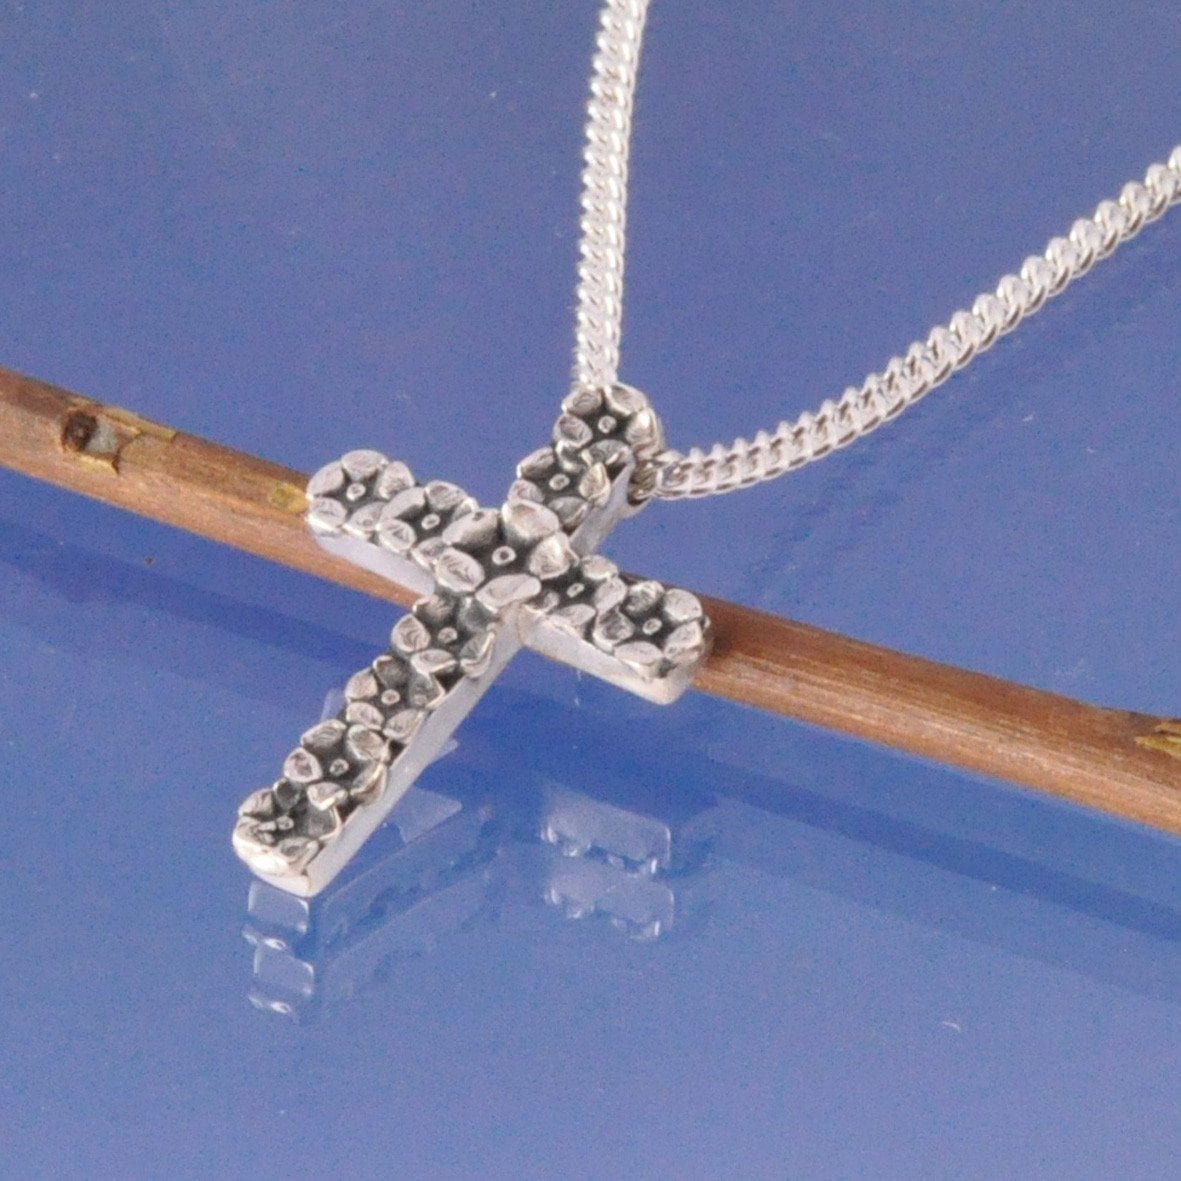 Forget Me Not Cross Pendant by Chris Parry Jewellery